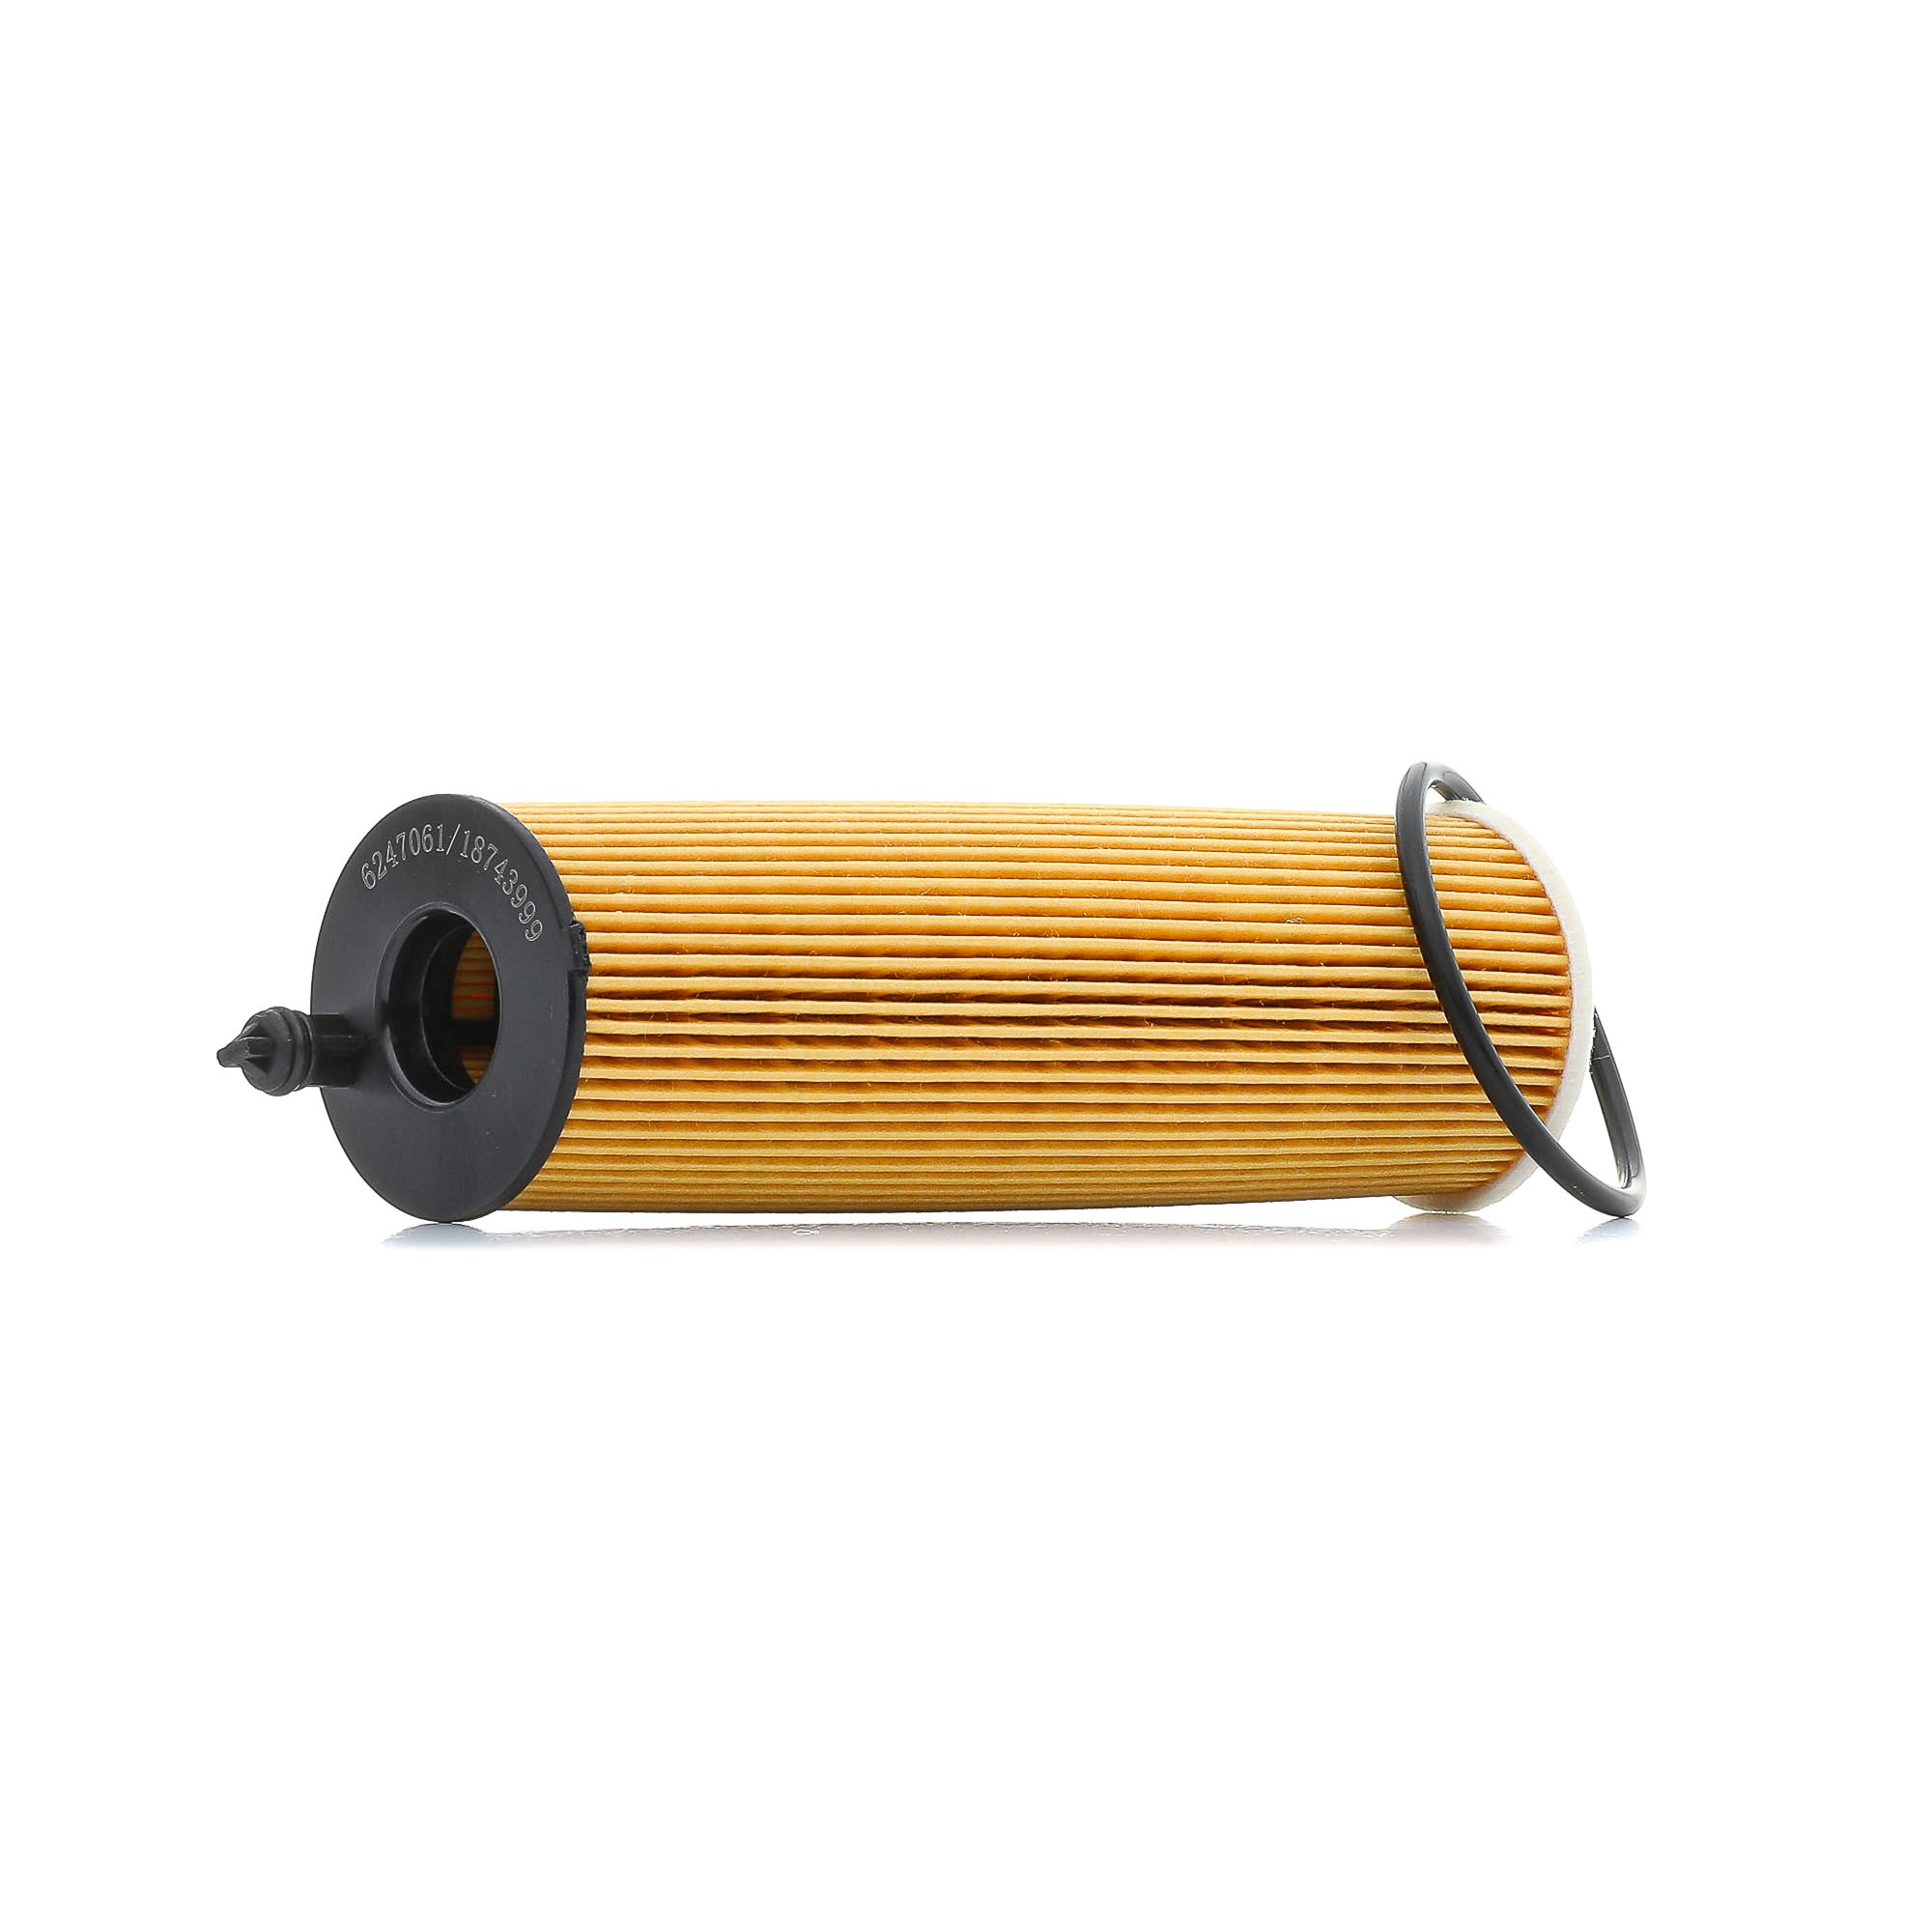 Oil filter suitable for Sprinter 4t Platform / Chassis (907) 417 CDI